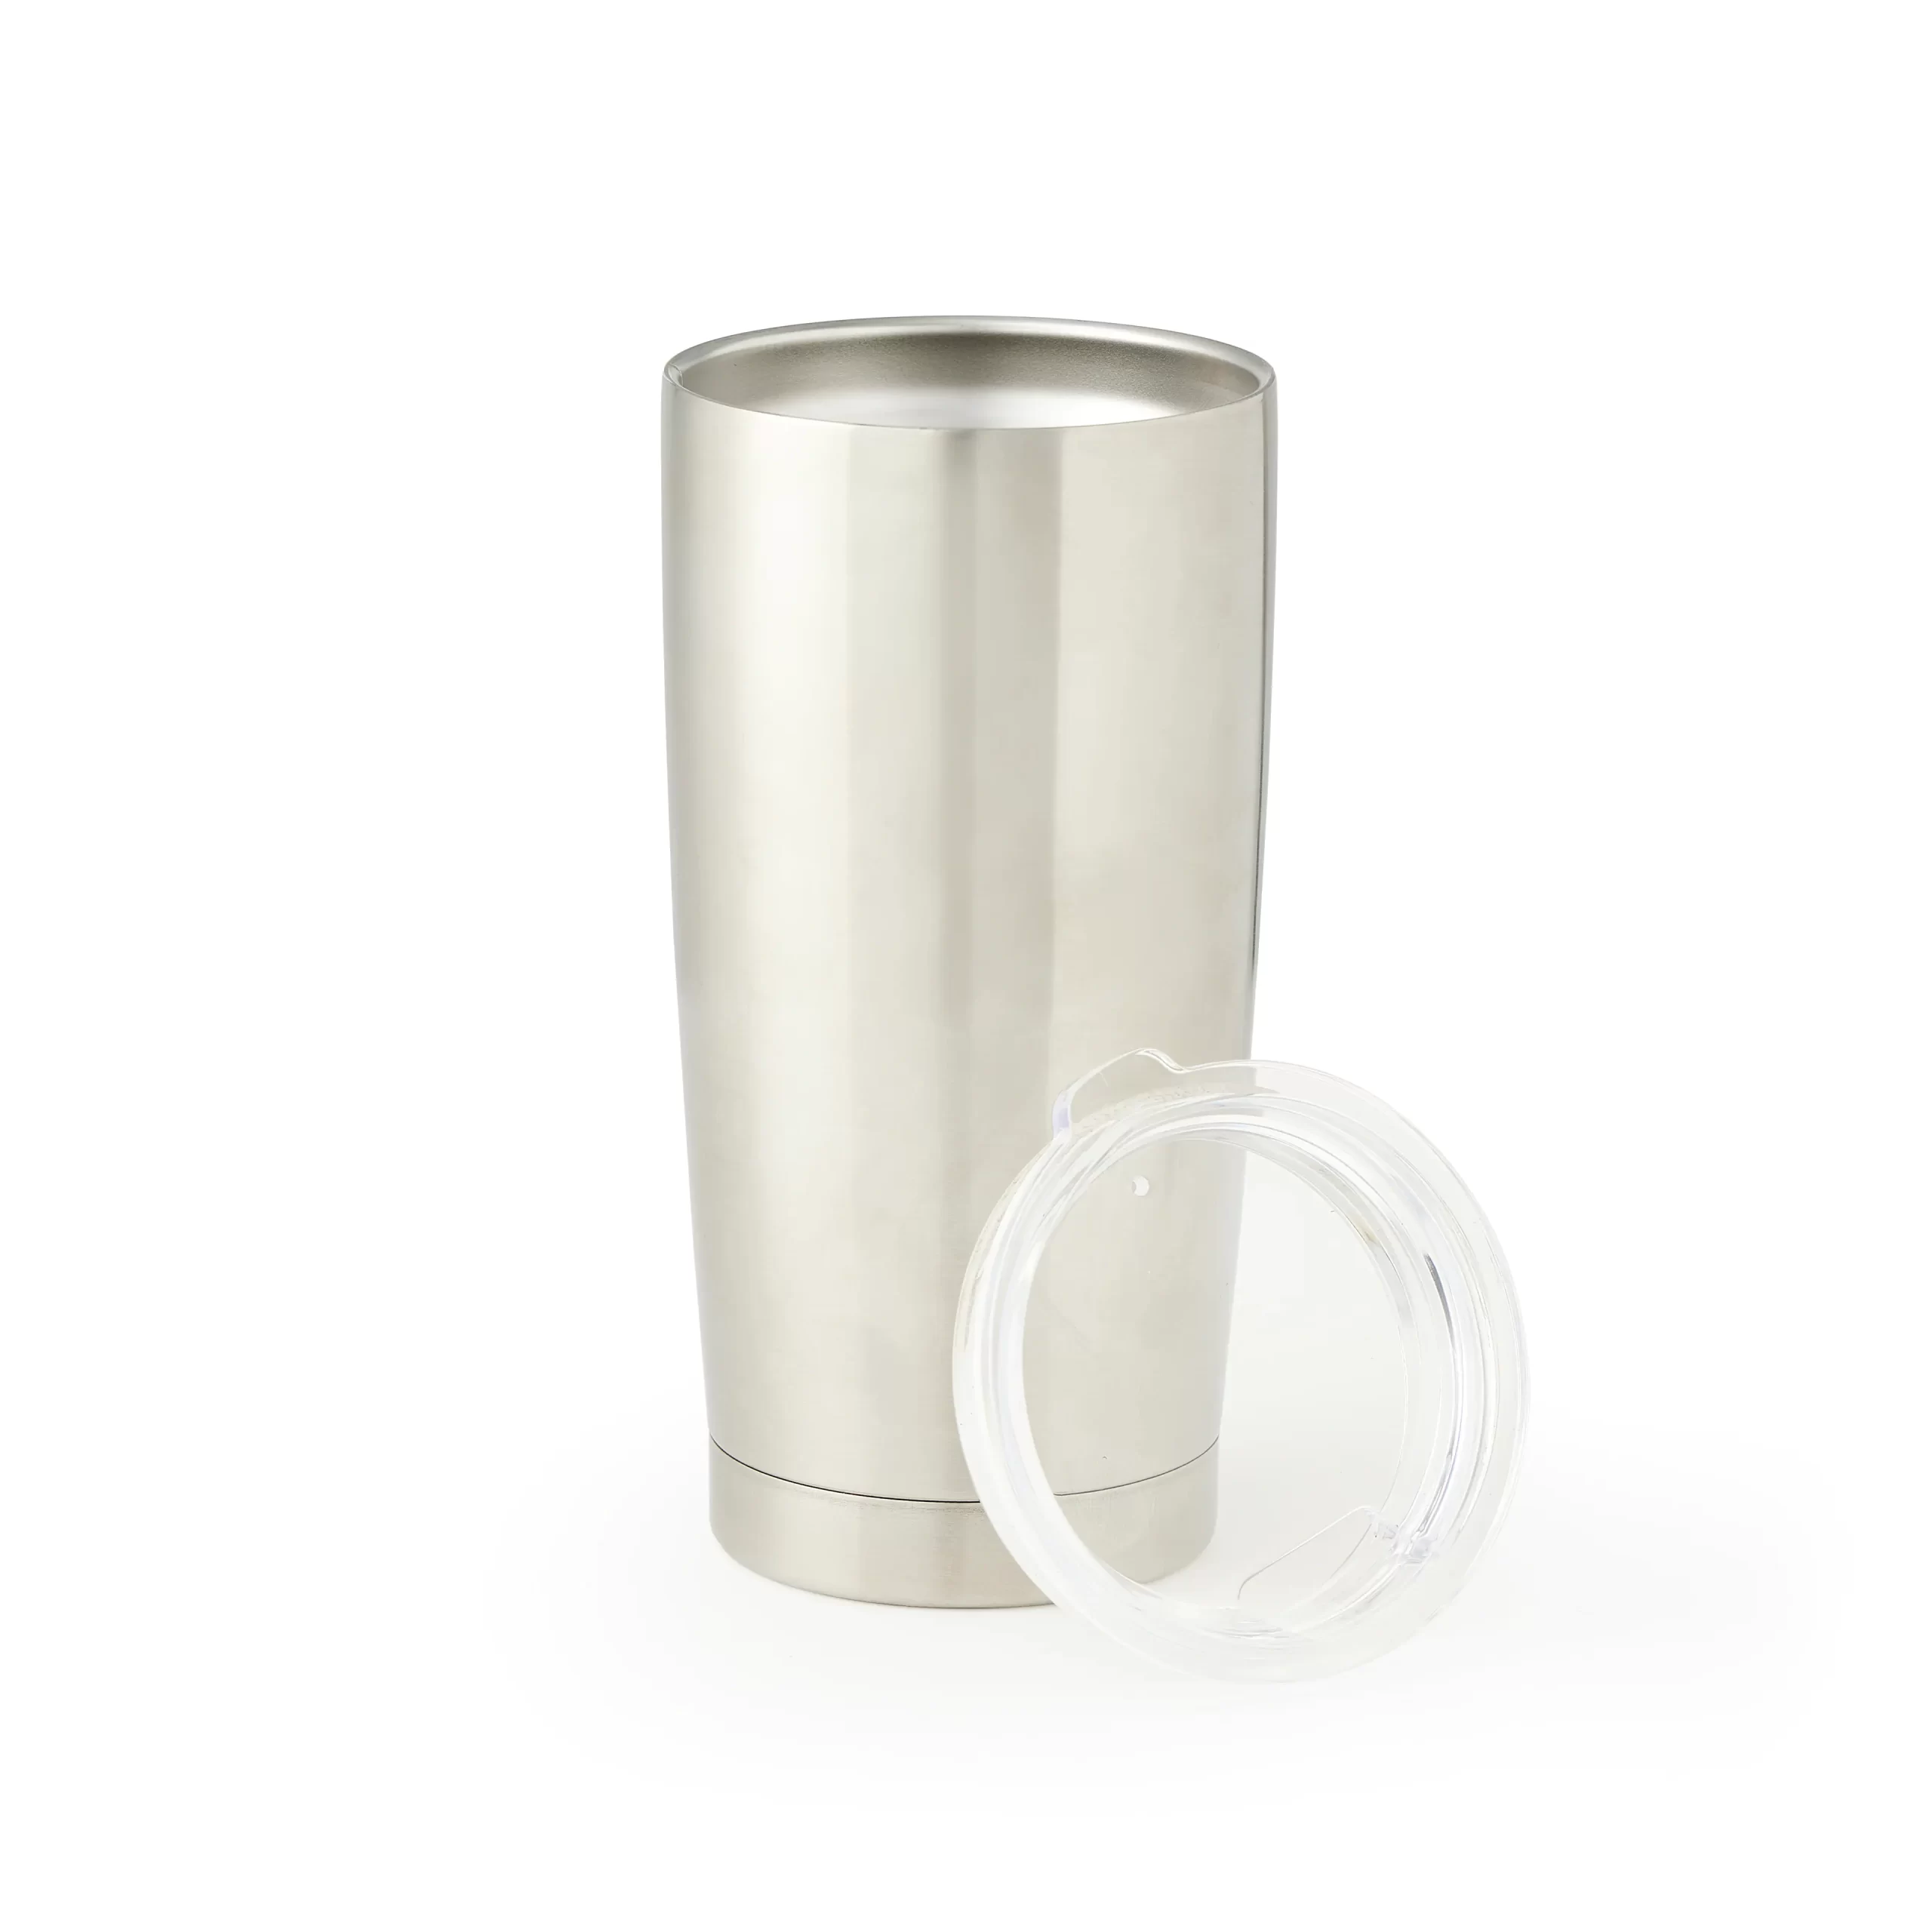 https://bigbigmart.com/wp-content/uploads/2022/12/24-Pack-18.5oz-Stainless-Steel-Tumbler-by-ArtMinds-5-scaled.webp